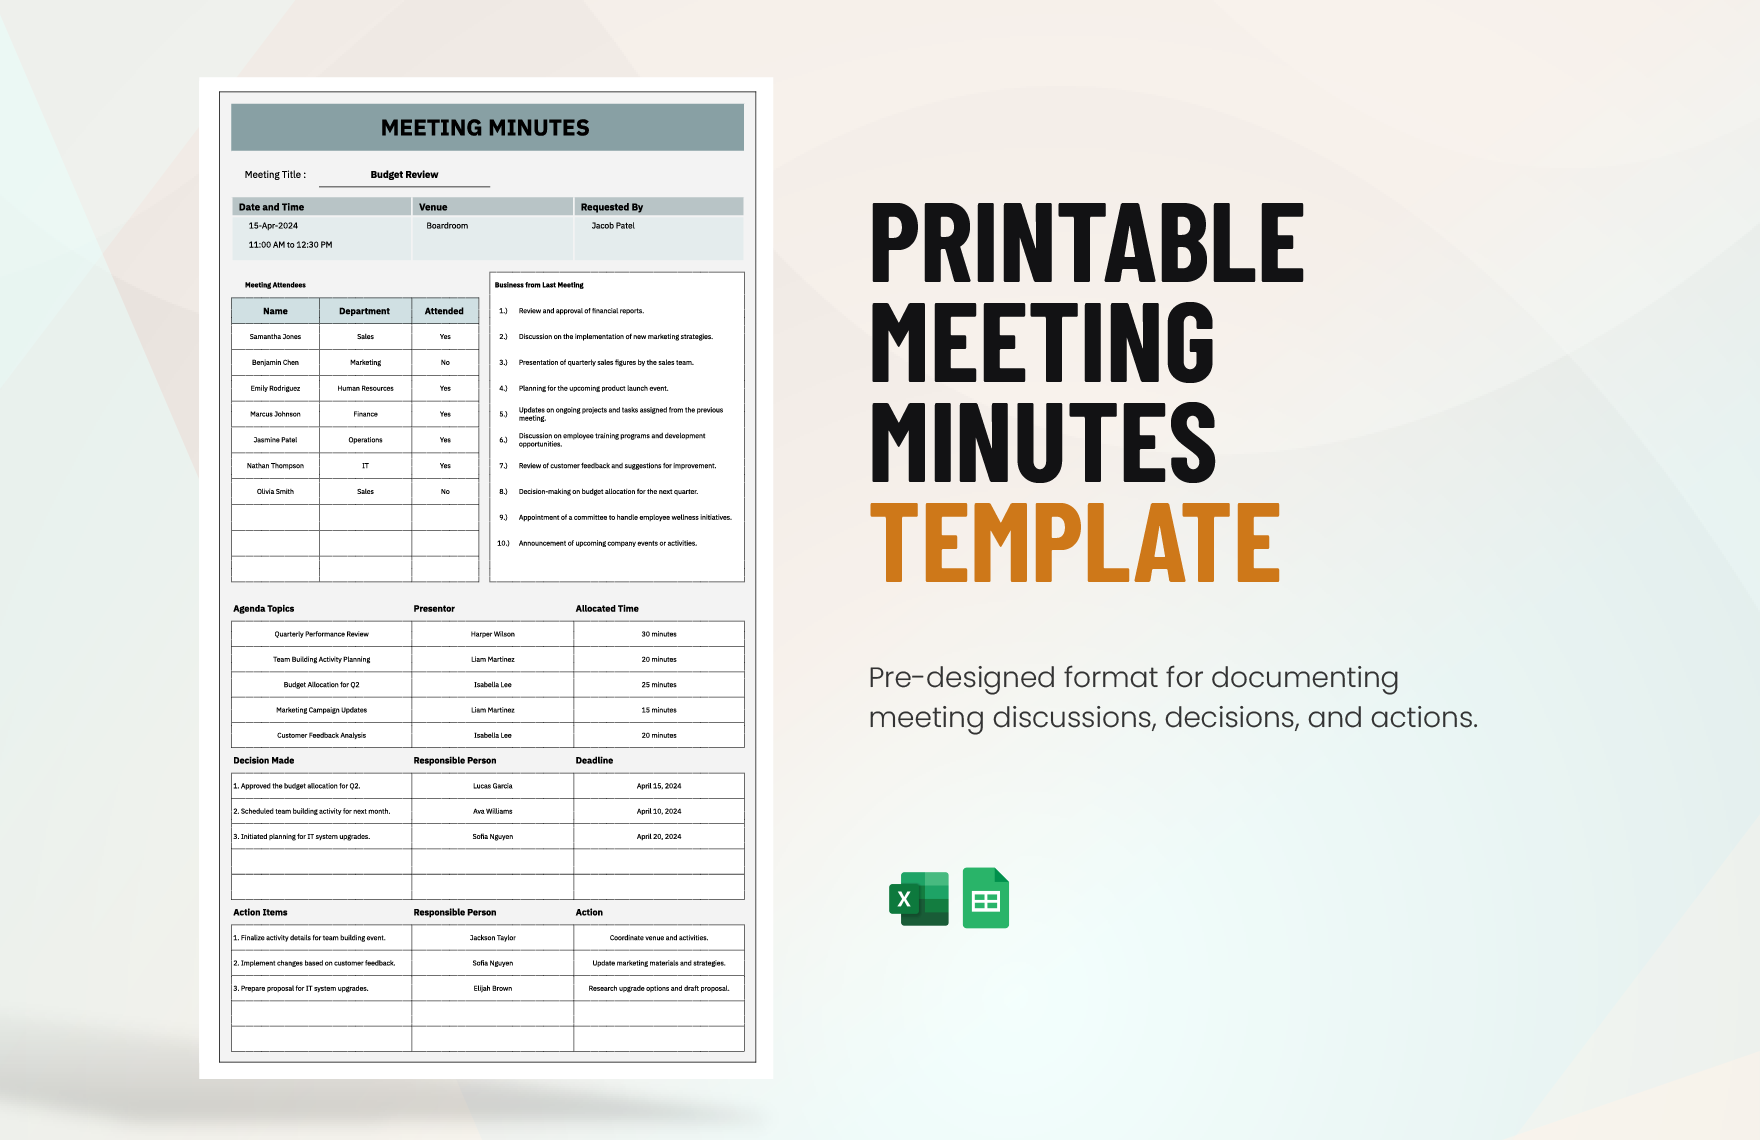 Printable Meeting Minutes Template in Excel, Google Sheets